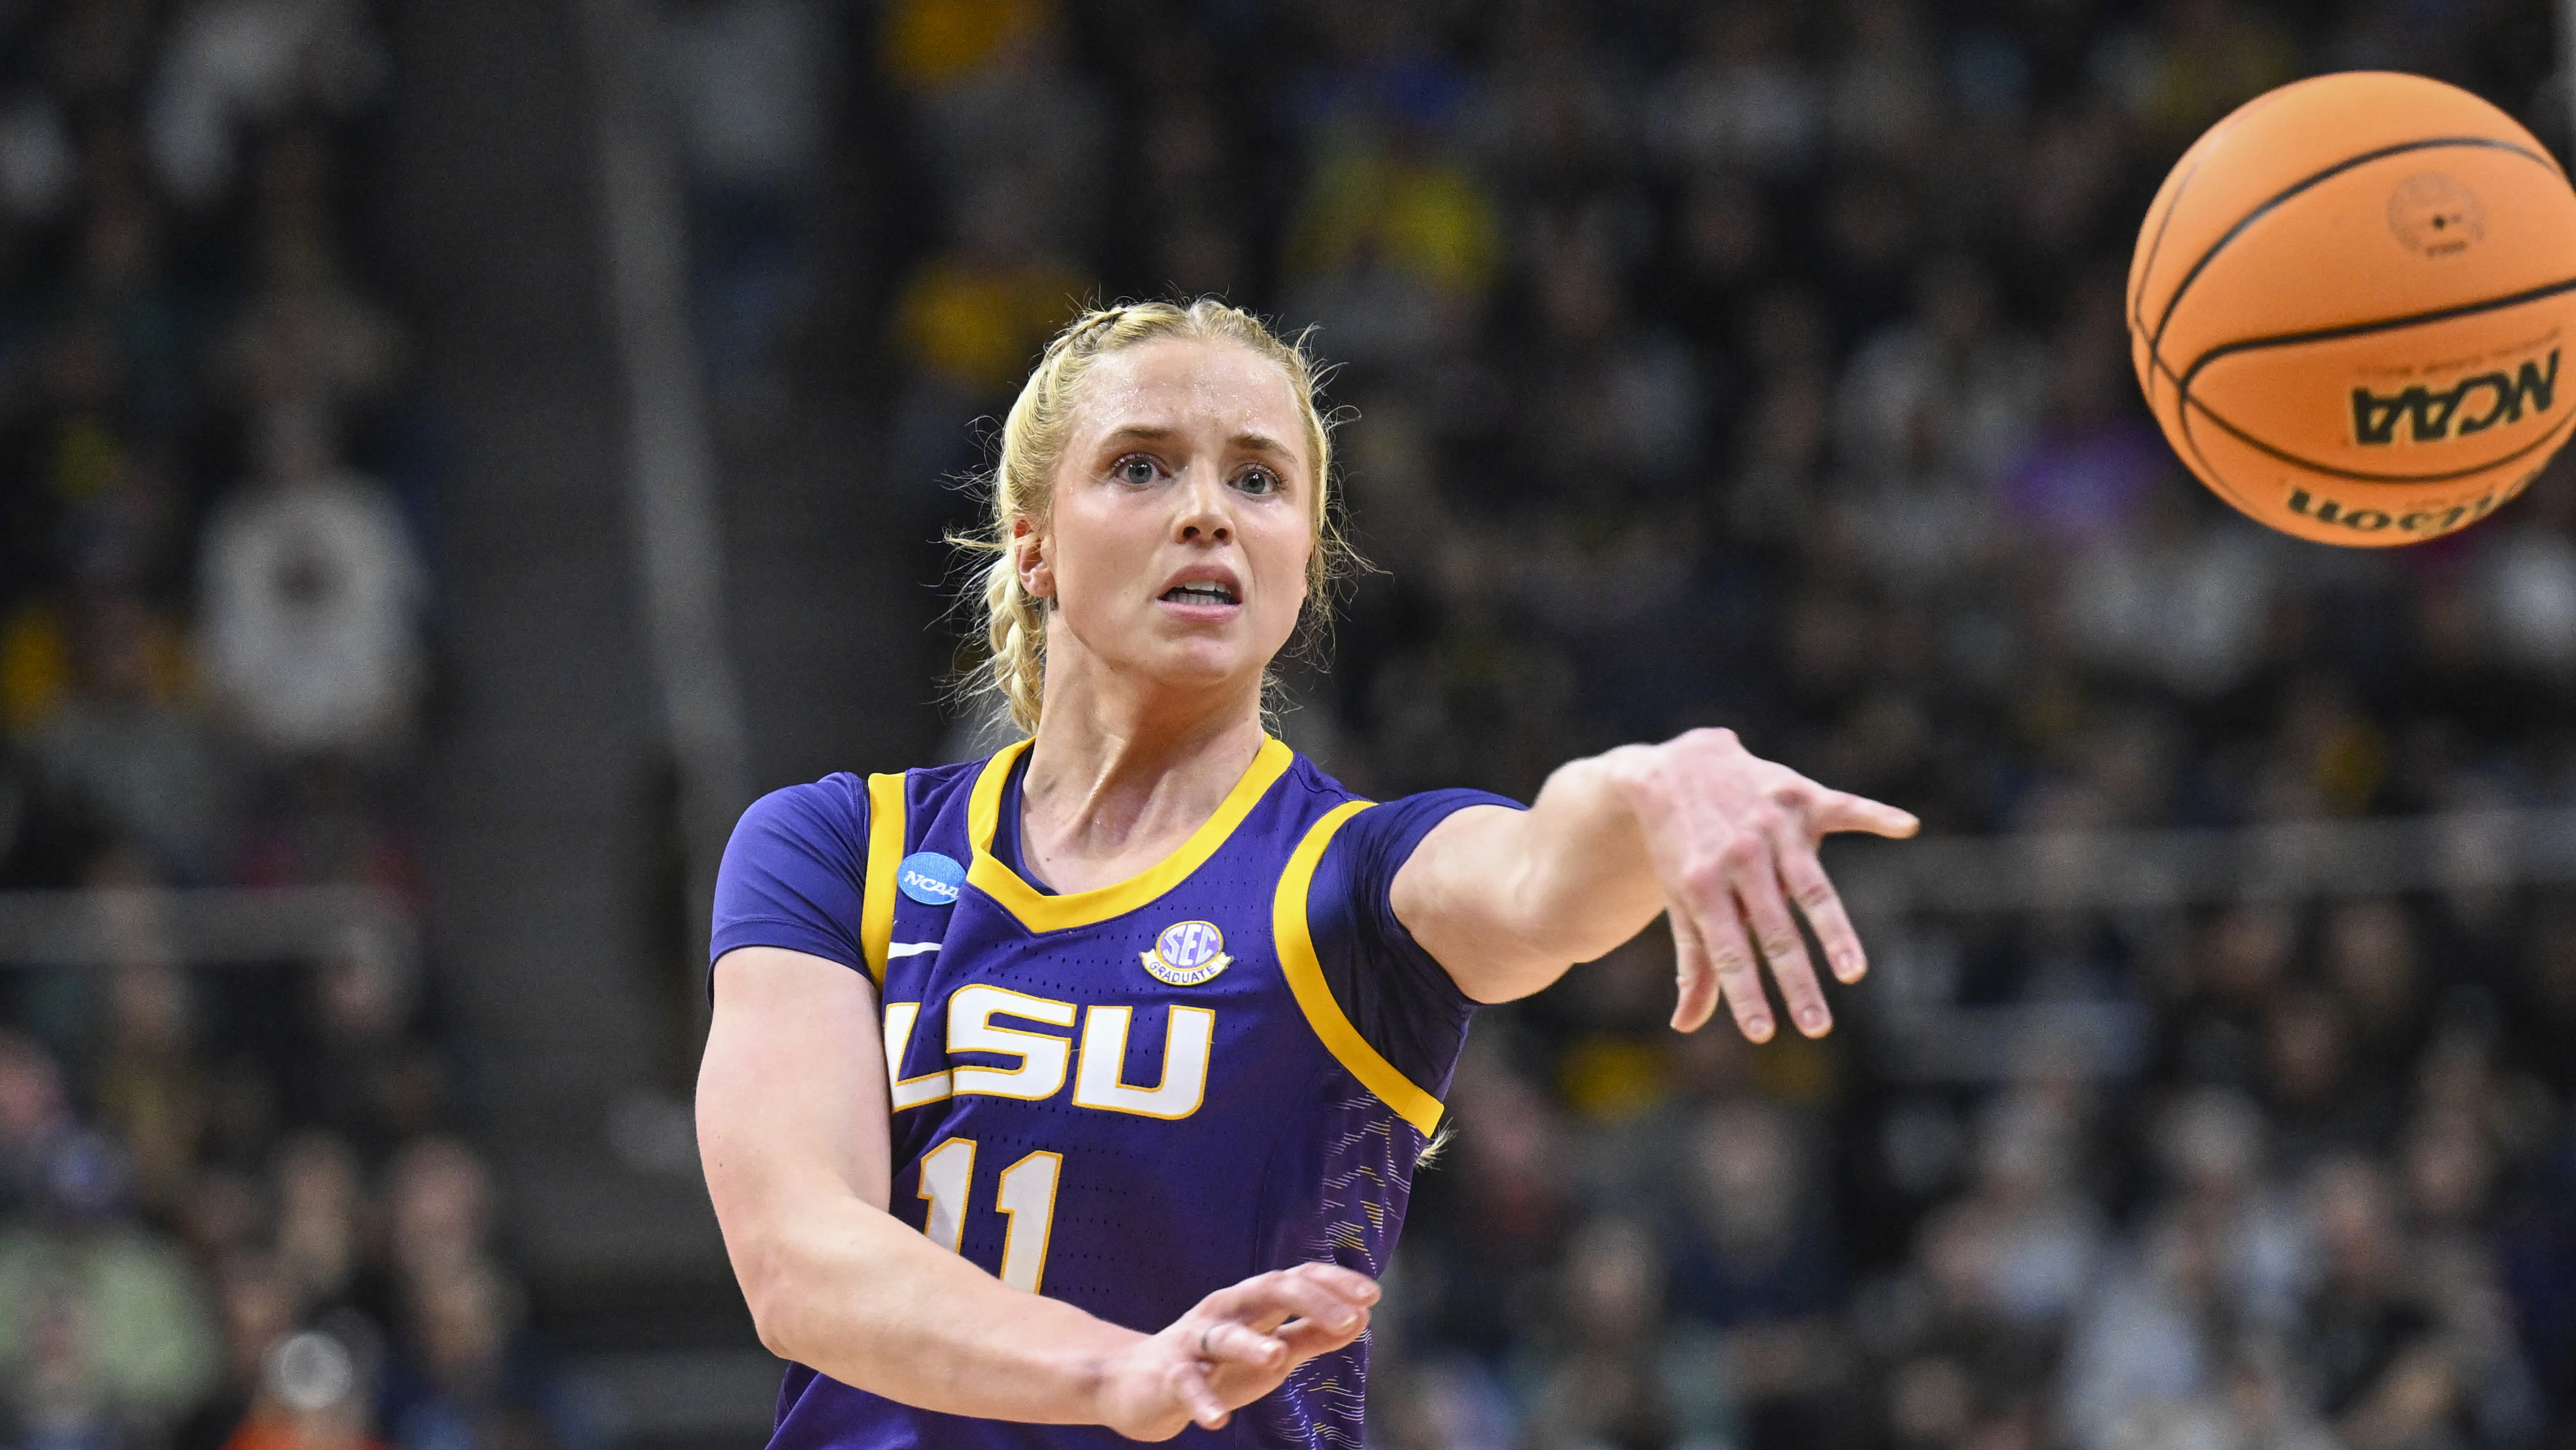 Hailey Van Lith is headed to TCU for a final season after a one-year run with LSU